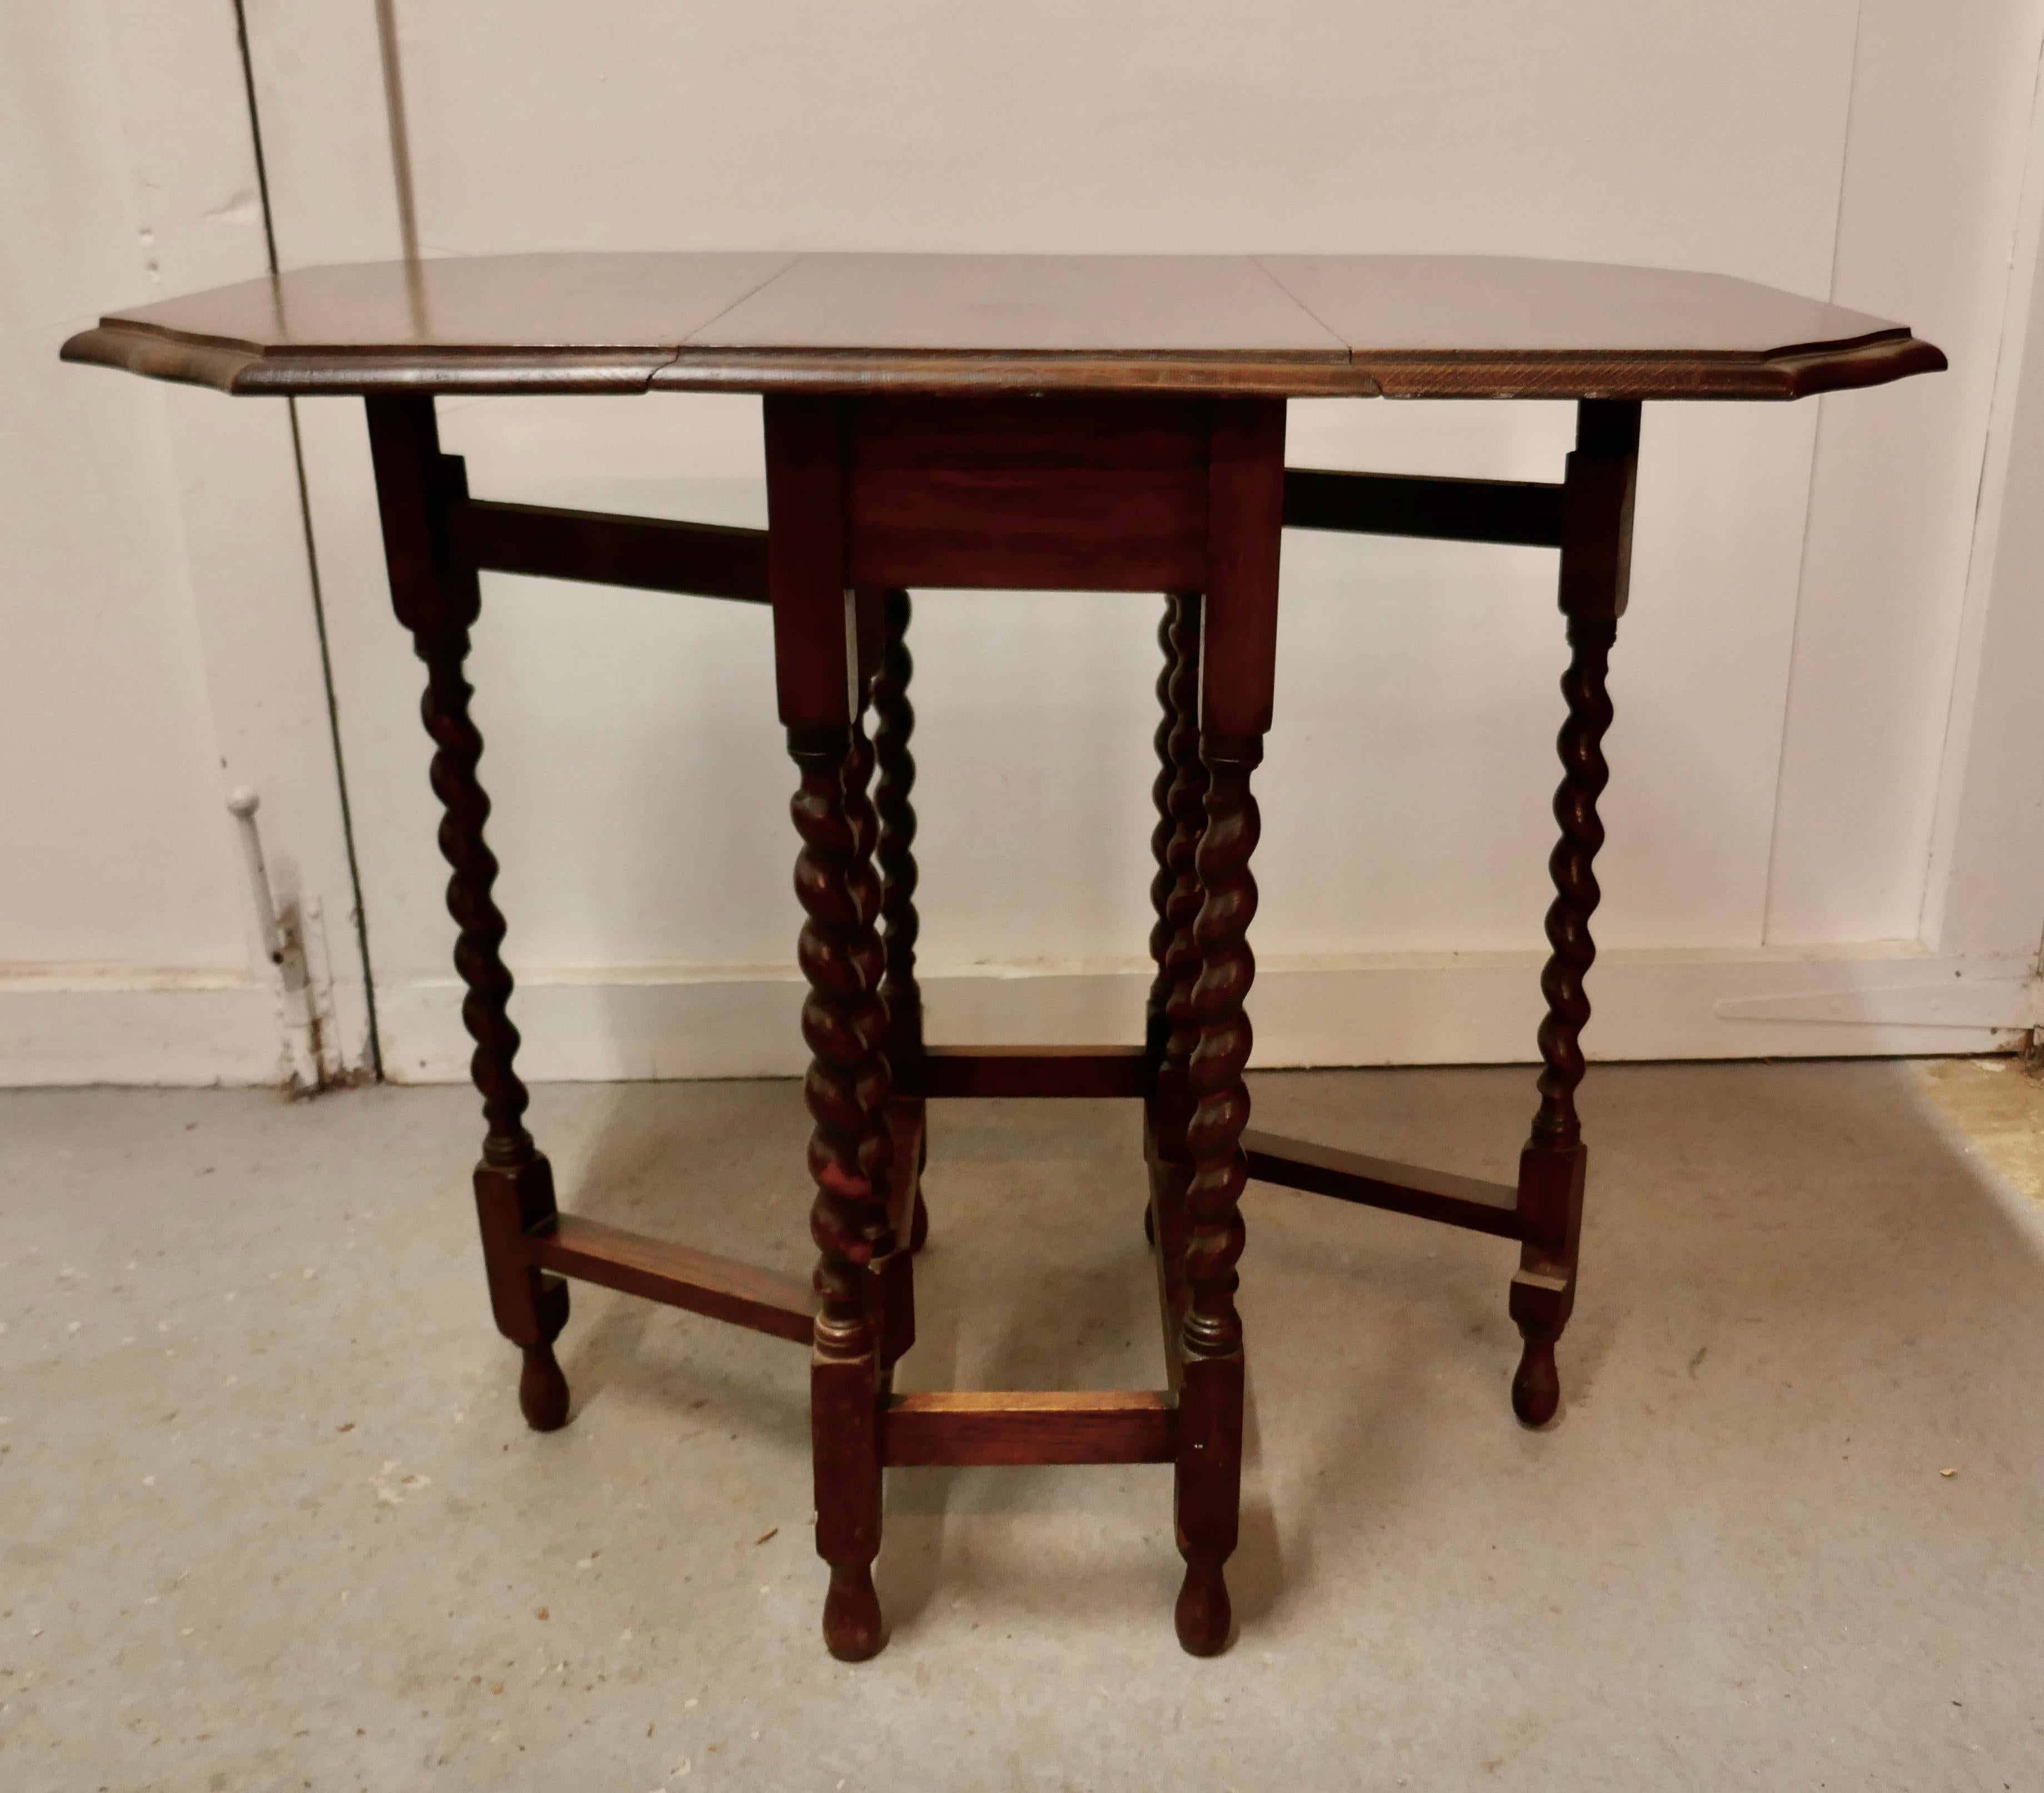 This is a Good Solid Oak Victorian Gate Leg Table 2